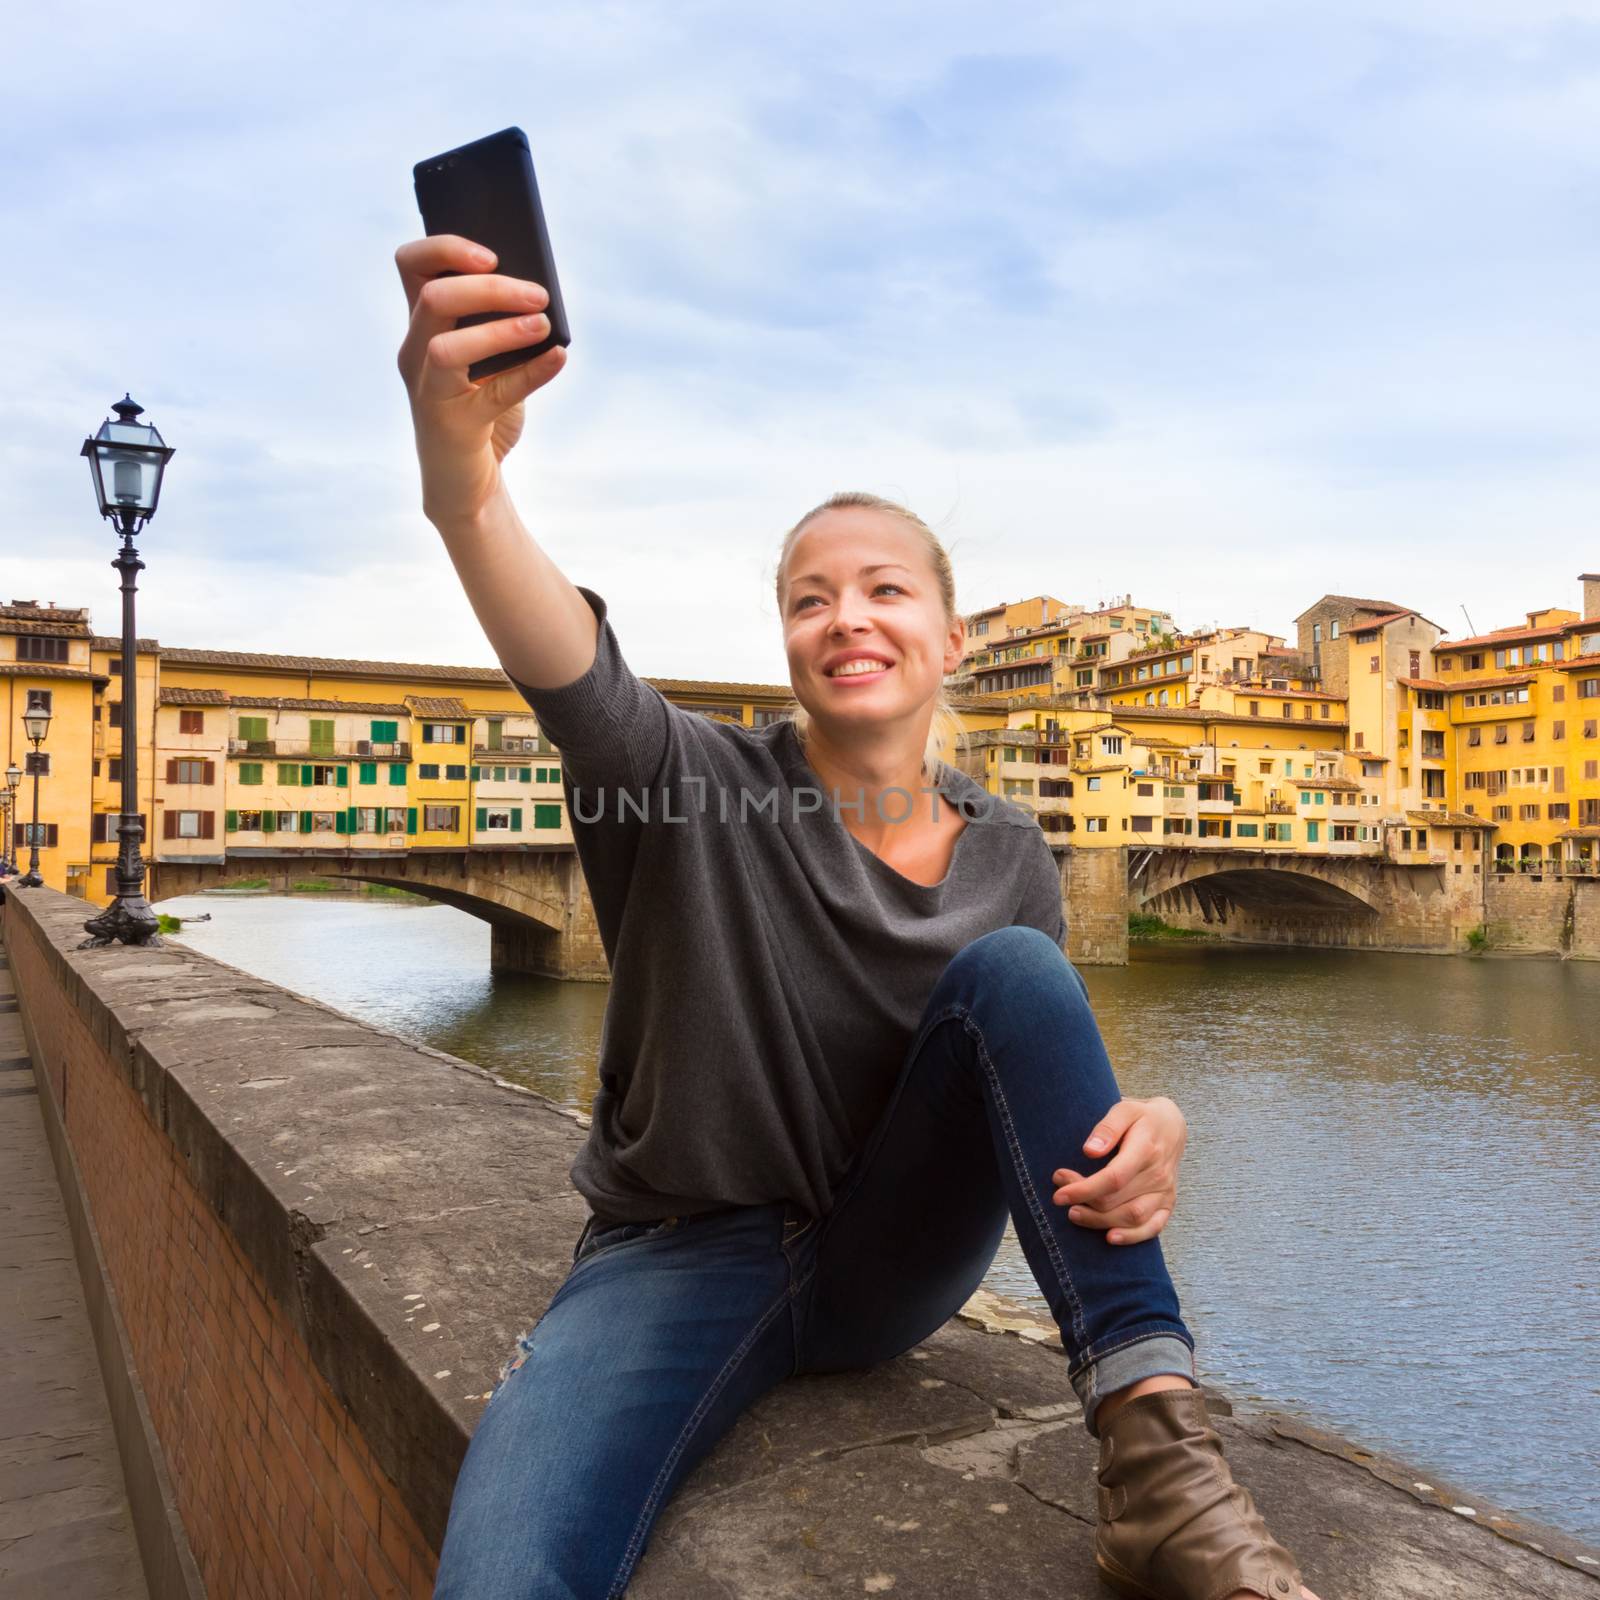 Young lady taking selfie in front of Ponte Vecchio bridge in Florence, Tuscany, Italy, during her summer vacations in Europe.